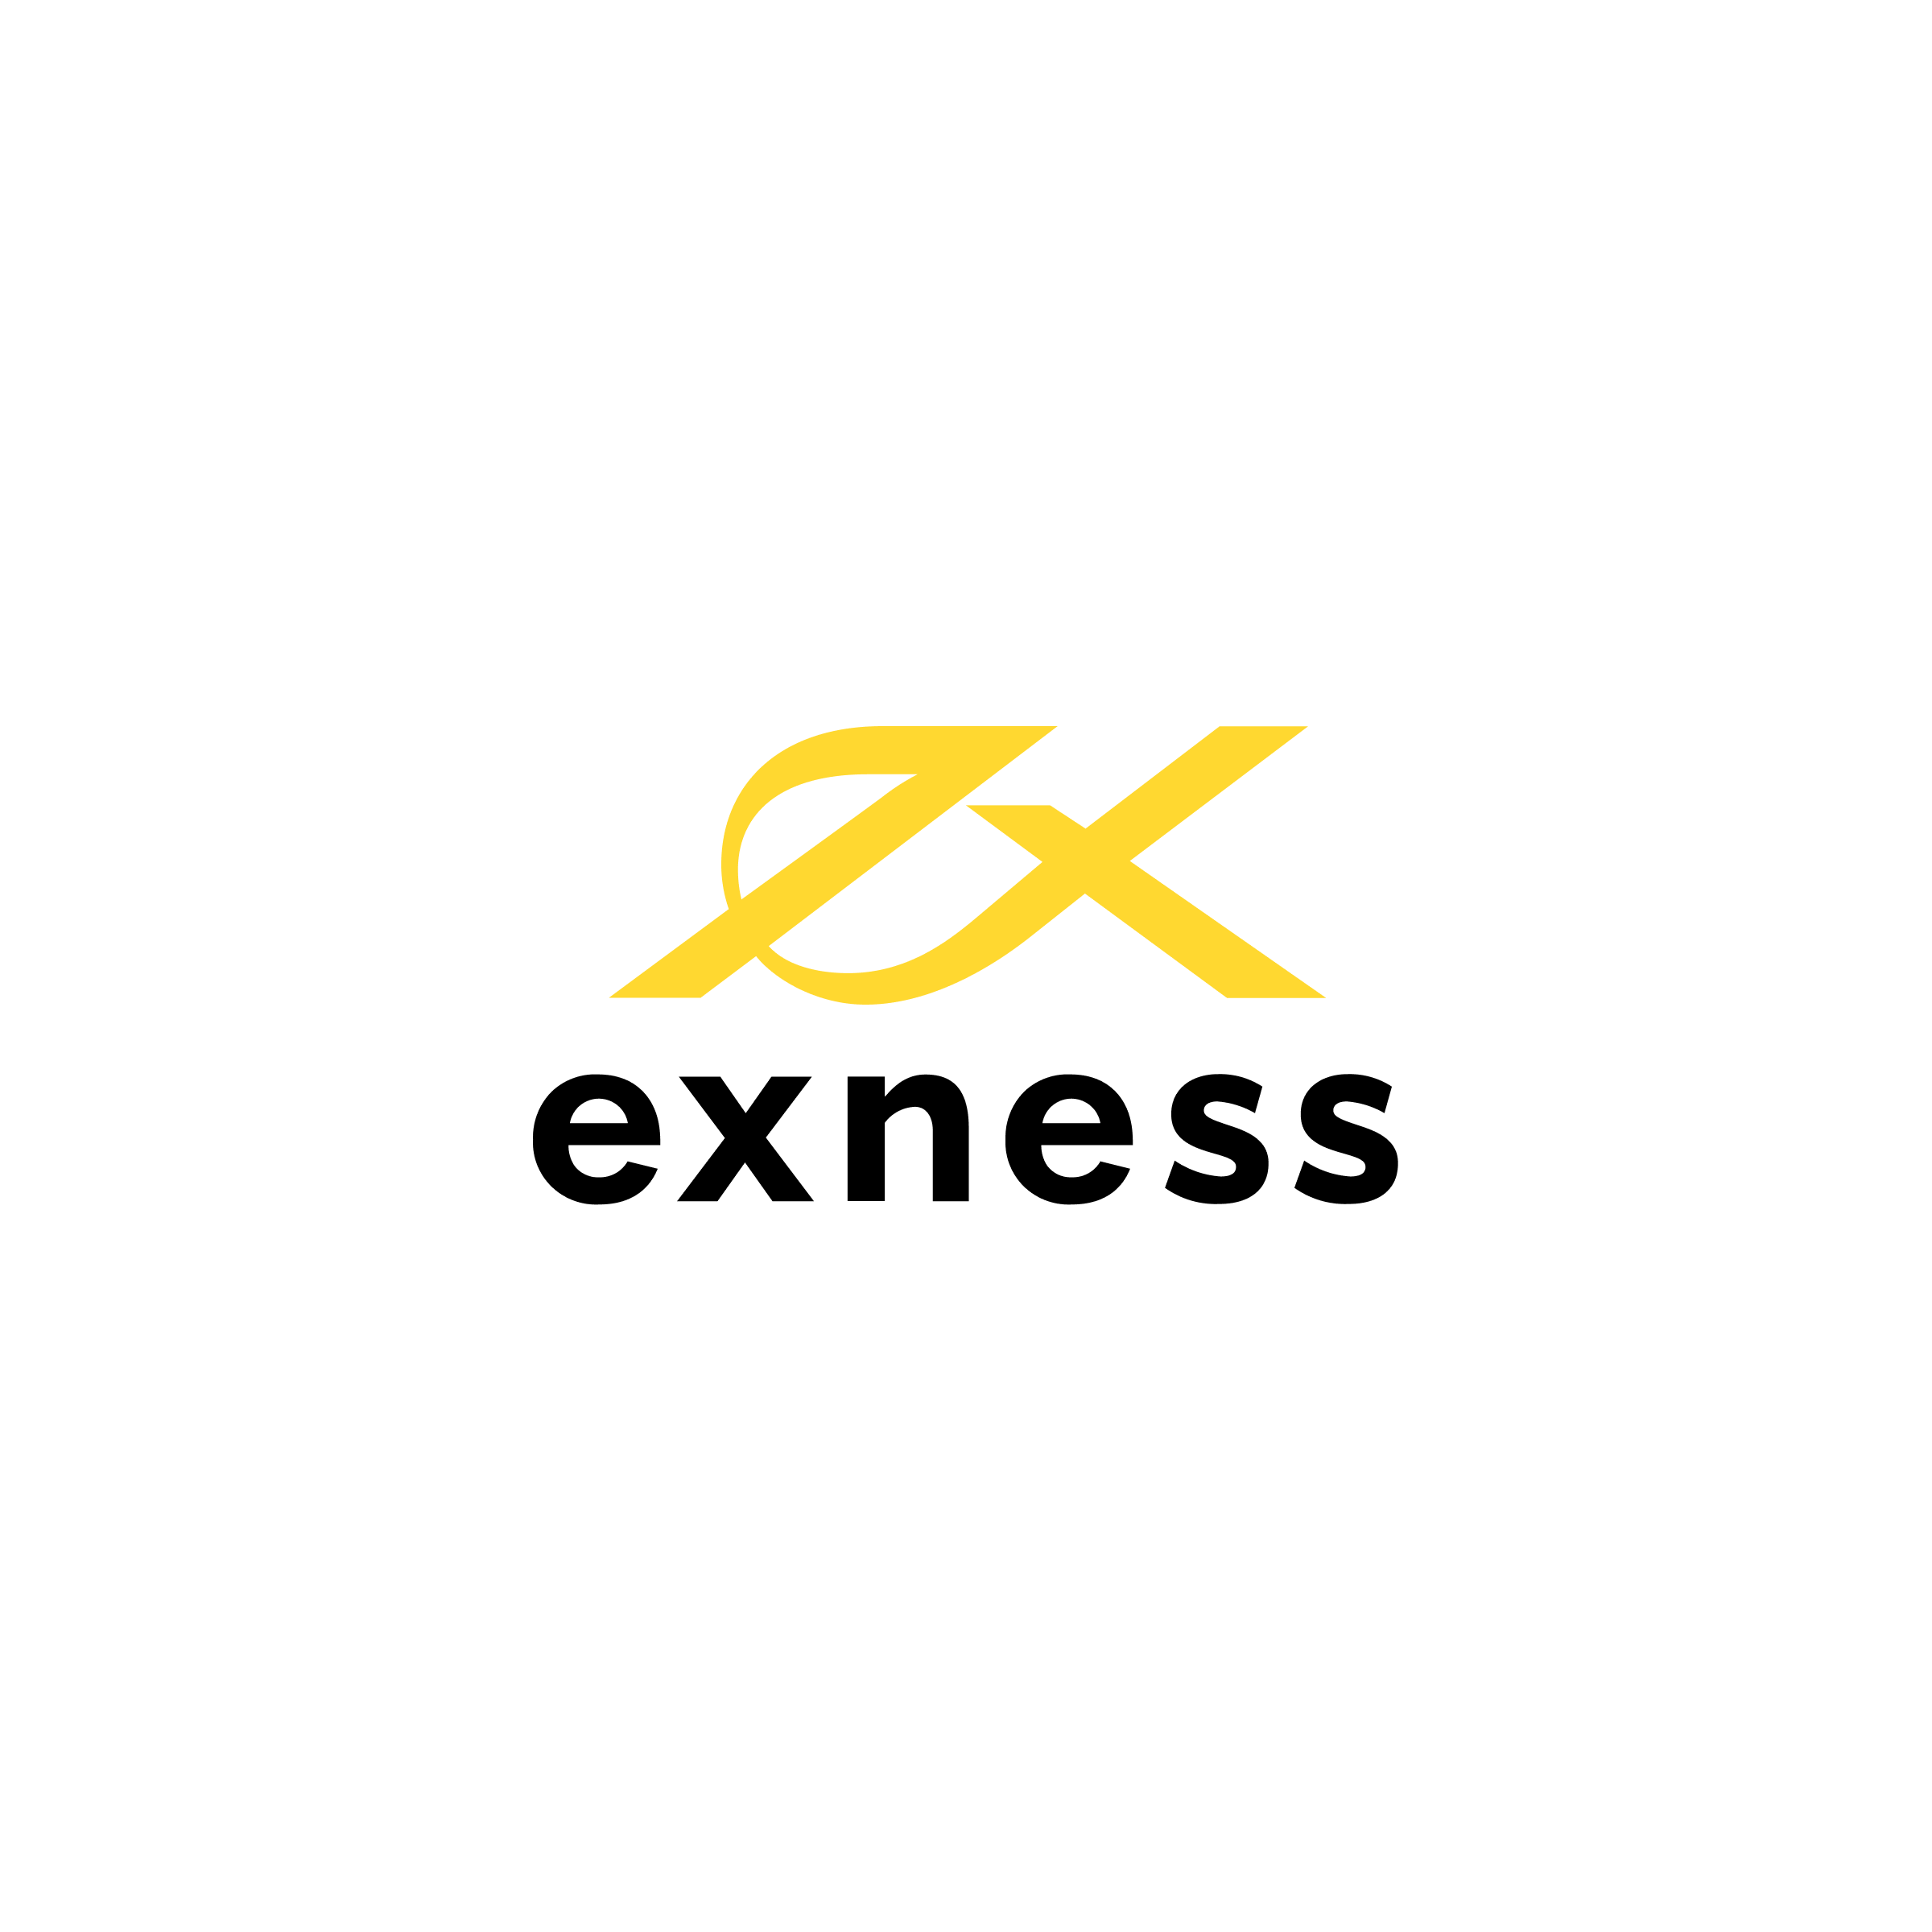 10 Reasons Why Having An Excellent Exness MetaTrader 4 Is Not Enough